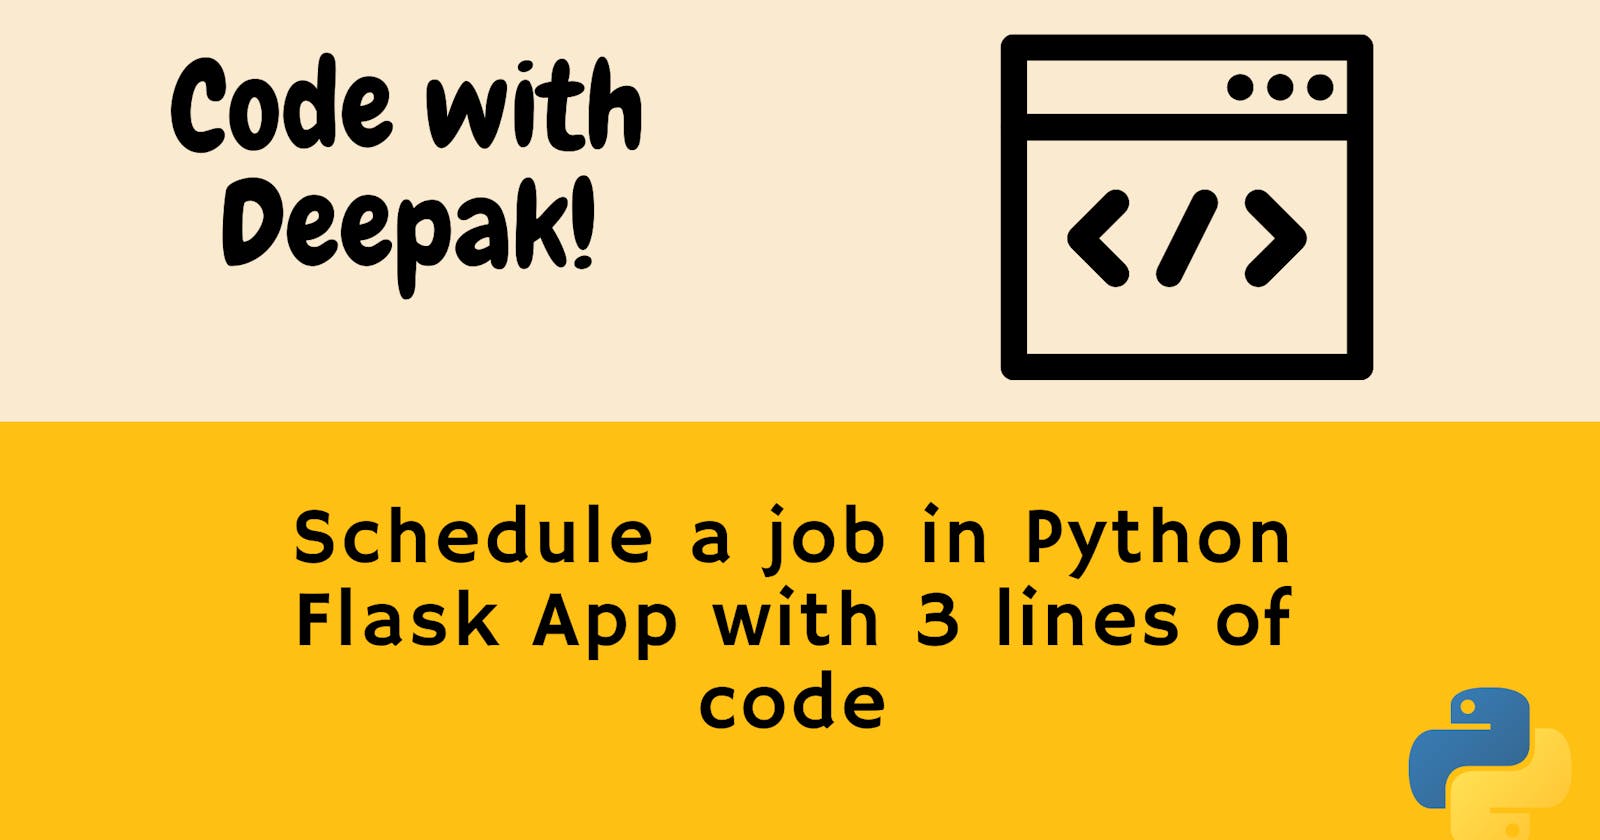 Schedule a job in Python Flask App with 3 lines of code